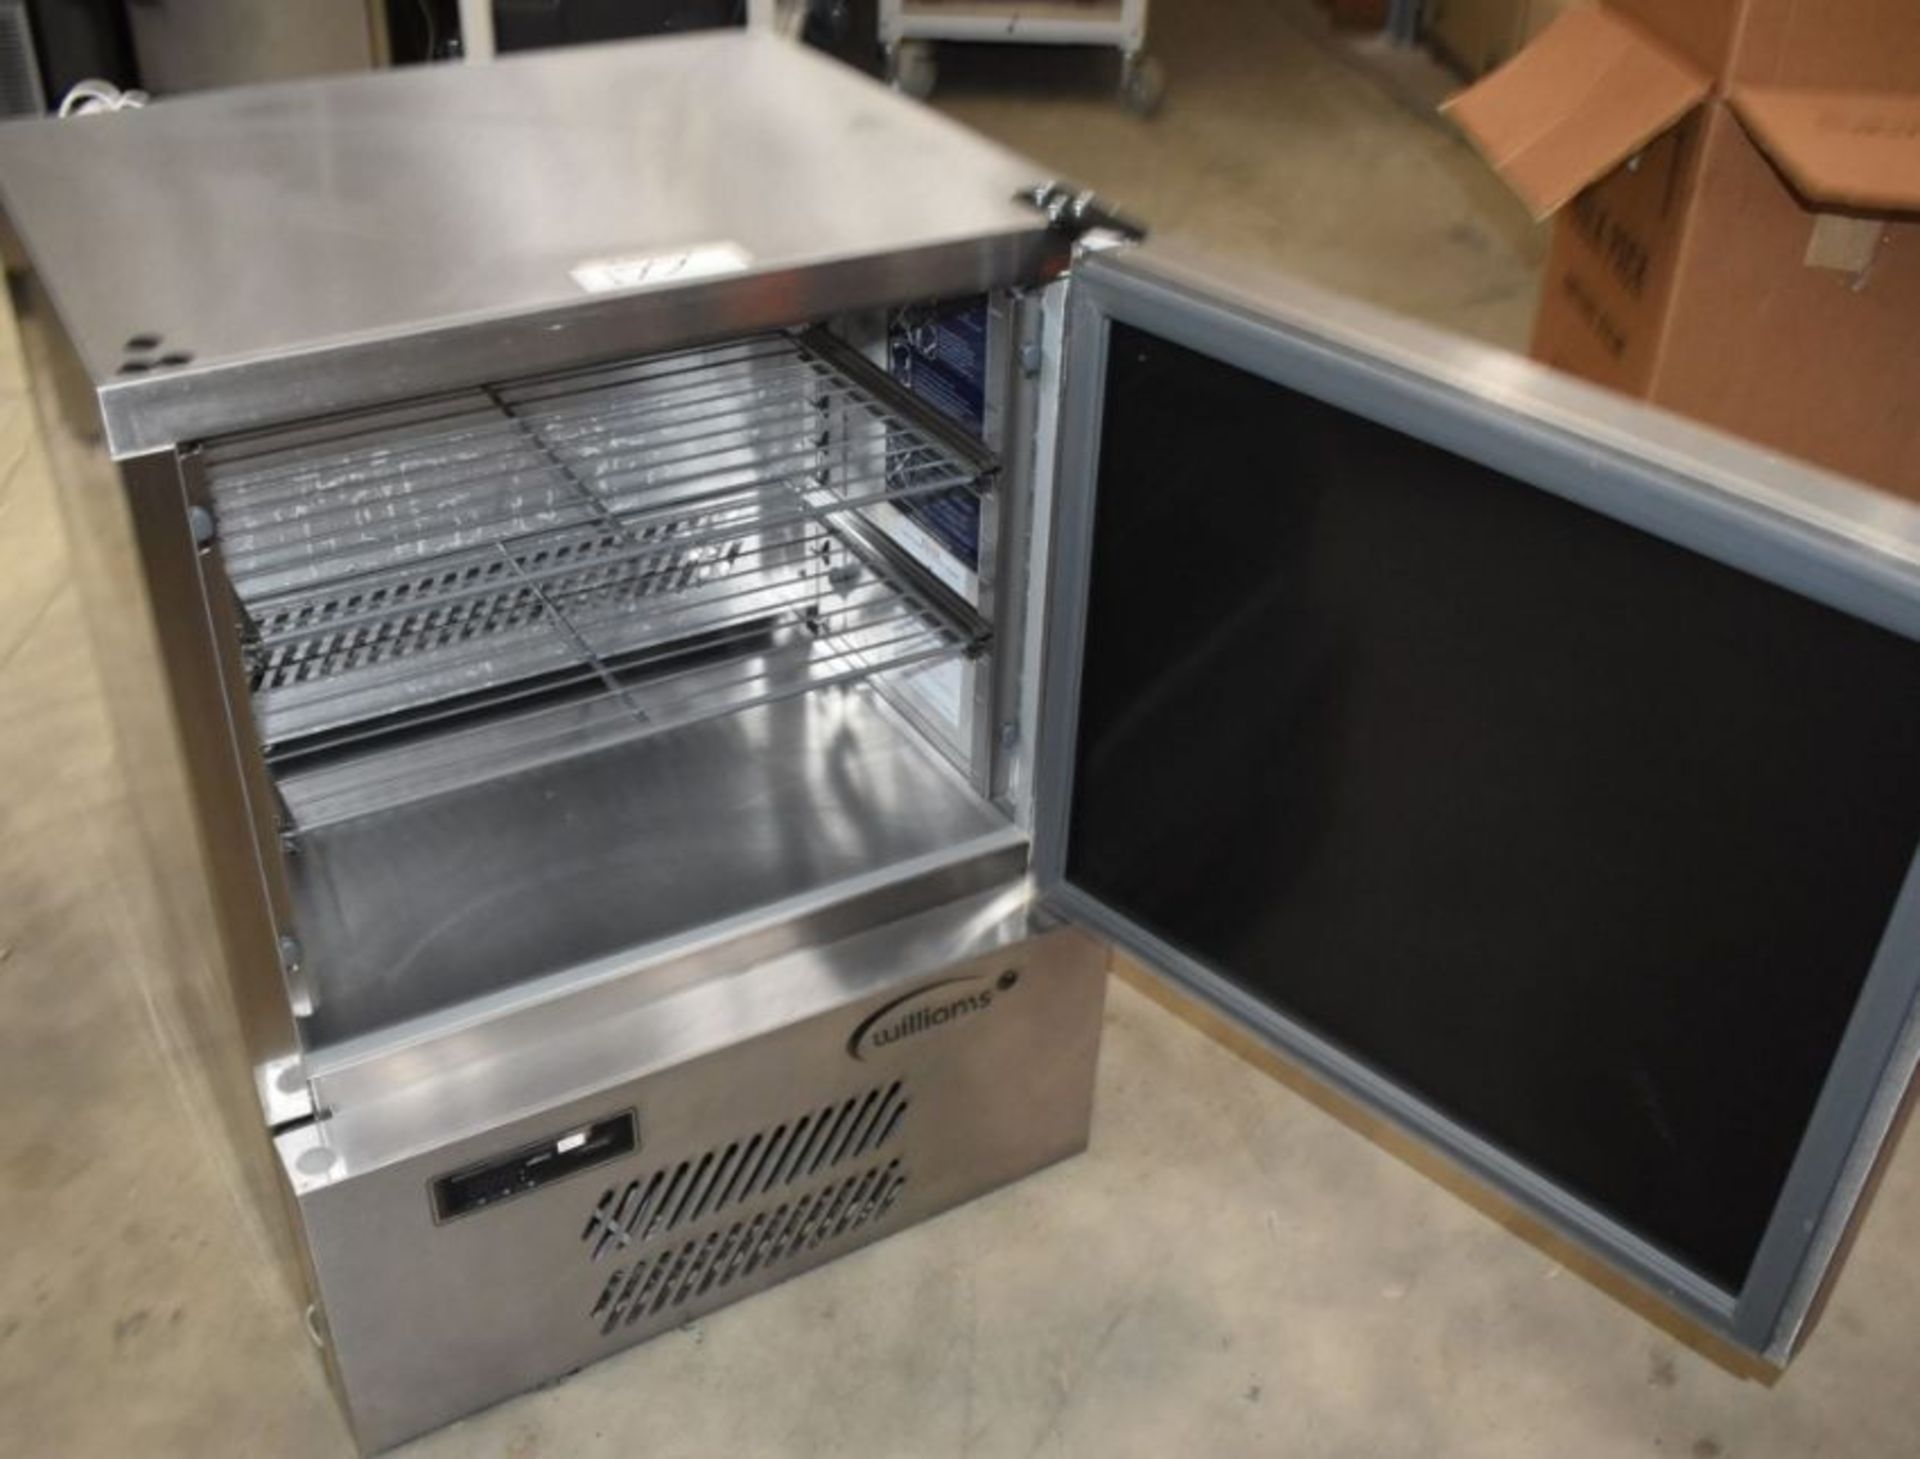 1 x Williams H5UC R290 R1 Single Door Stainless Steel Undercounter Fridge With Easy Grab Handle - Image 2 of 4